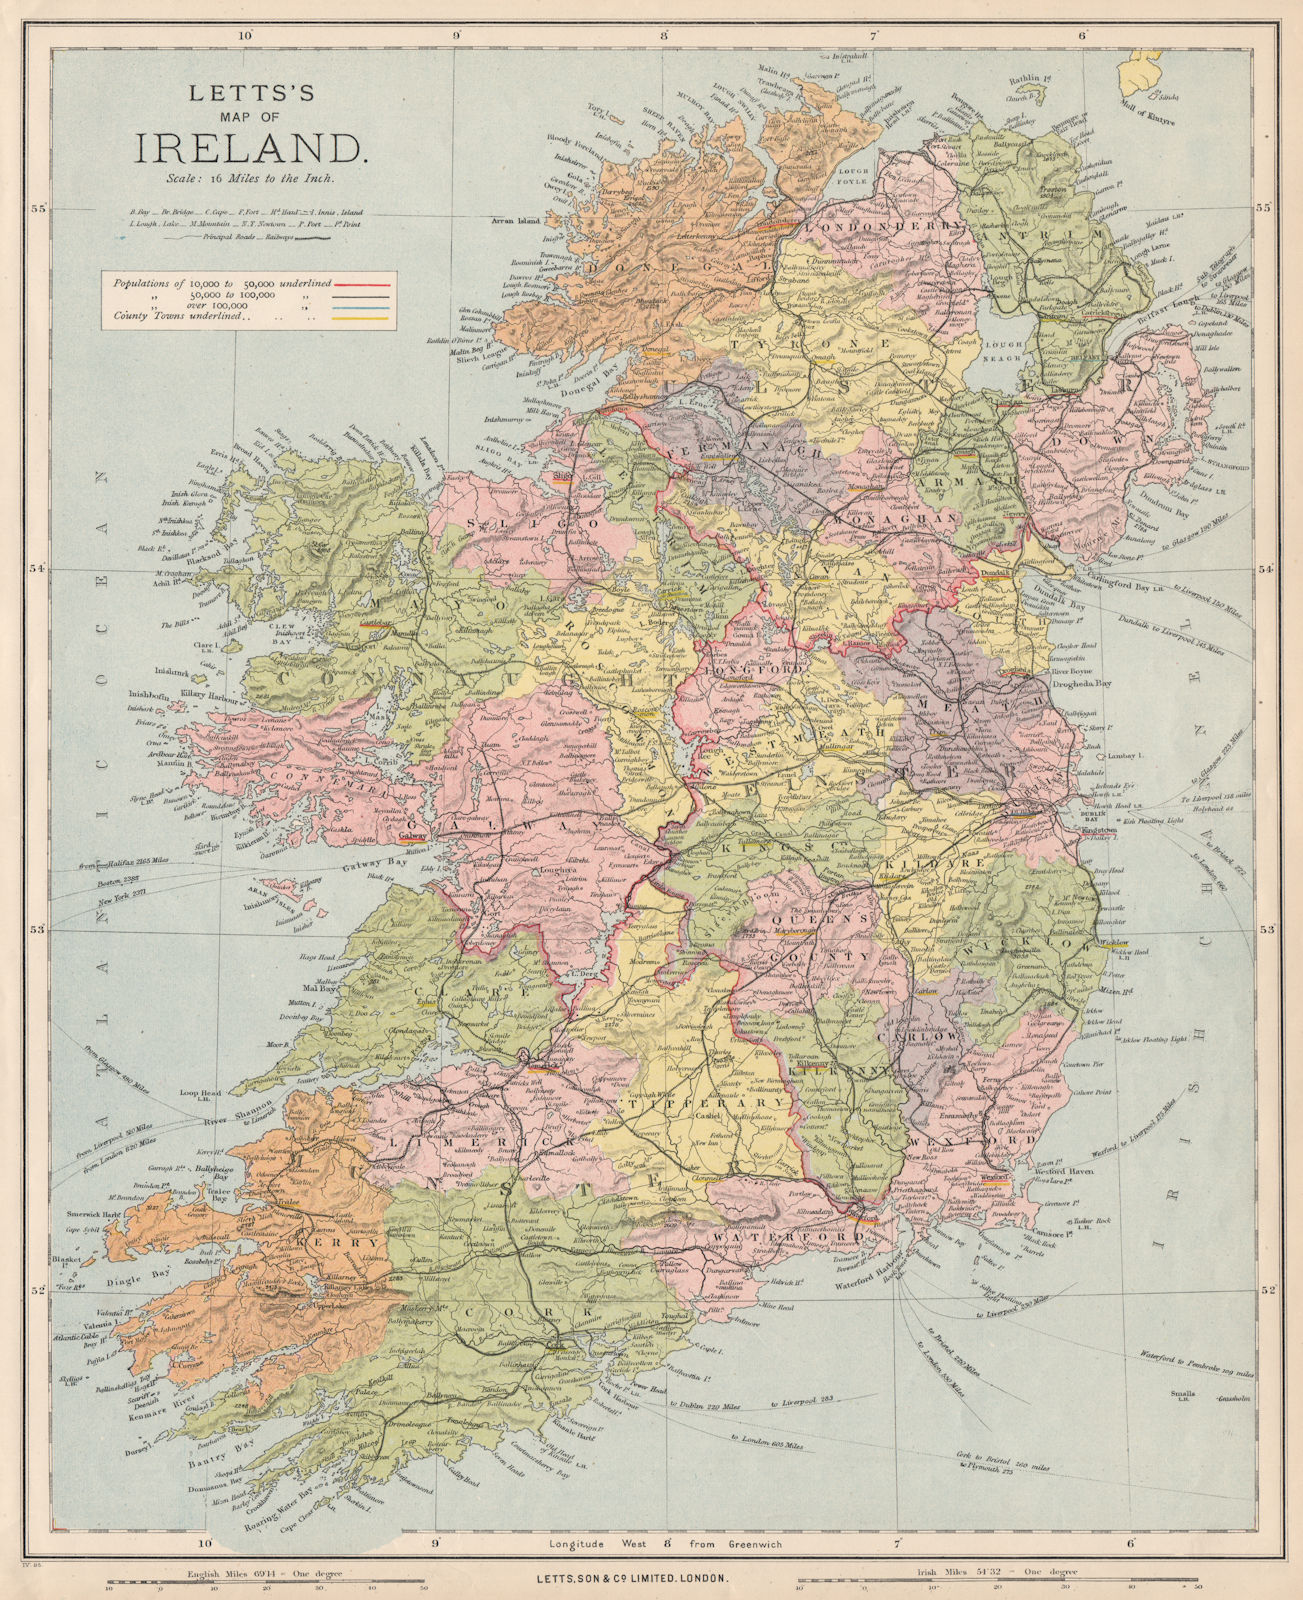 Associate Product IRELAND. Showing roads, railways, counties & provinces. LETTS 1889 old map